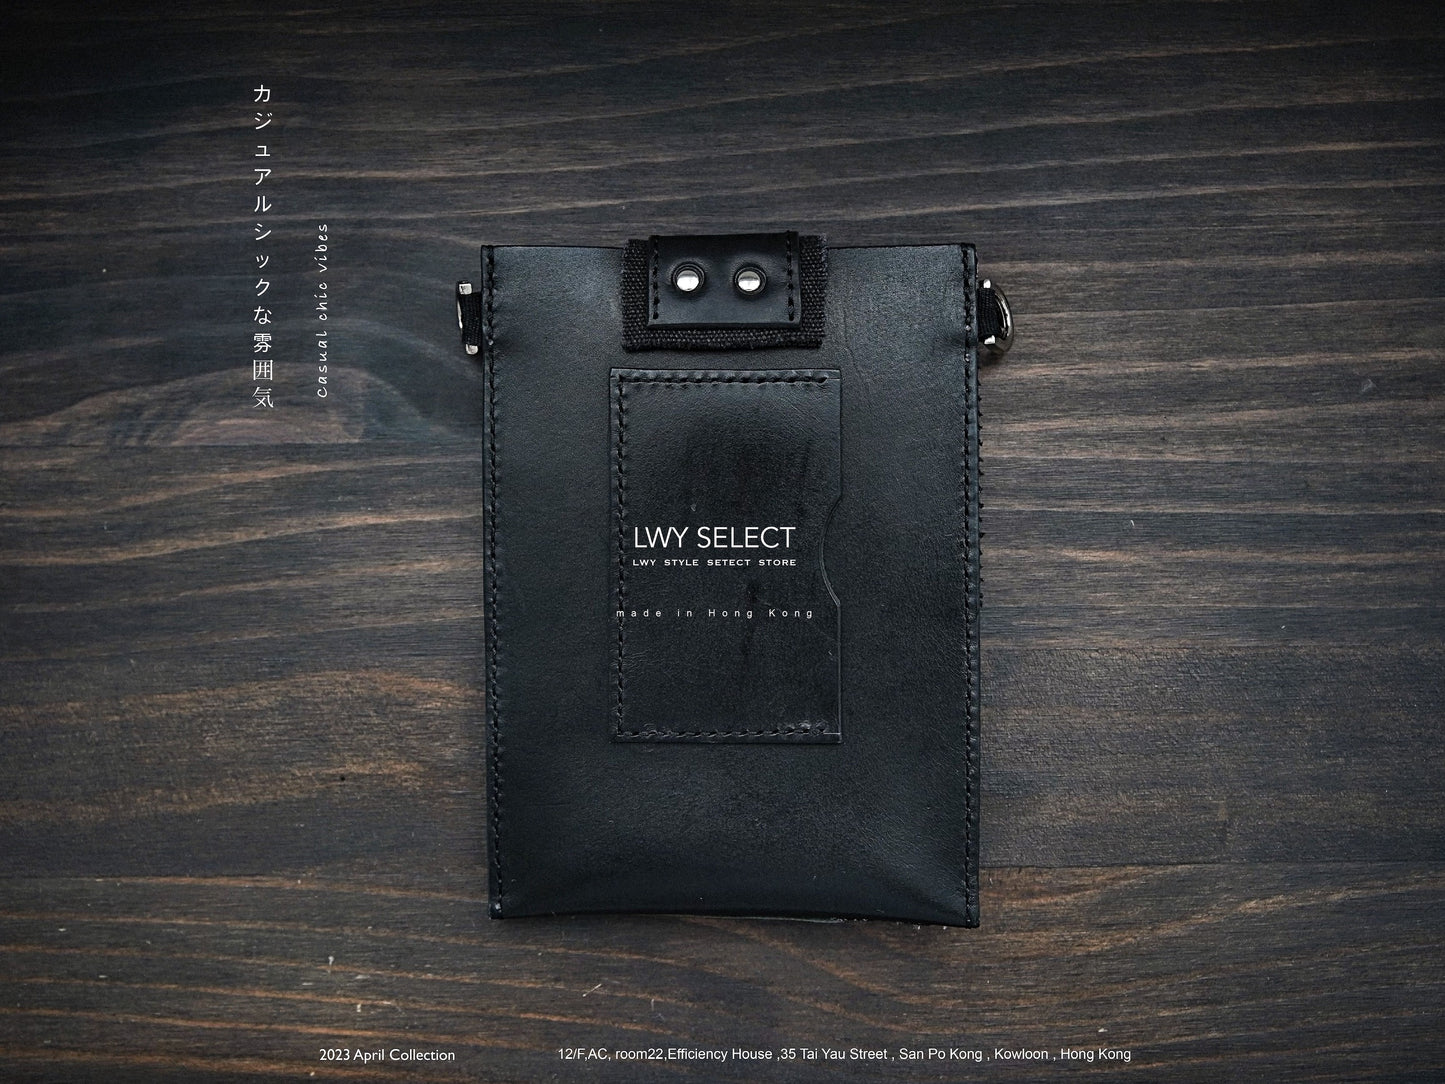 2023 April collection - Black leather patchwork phone case